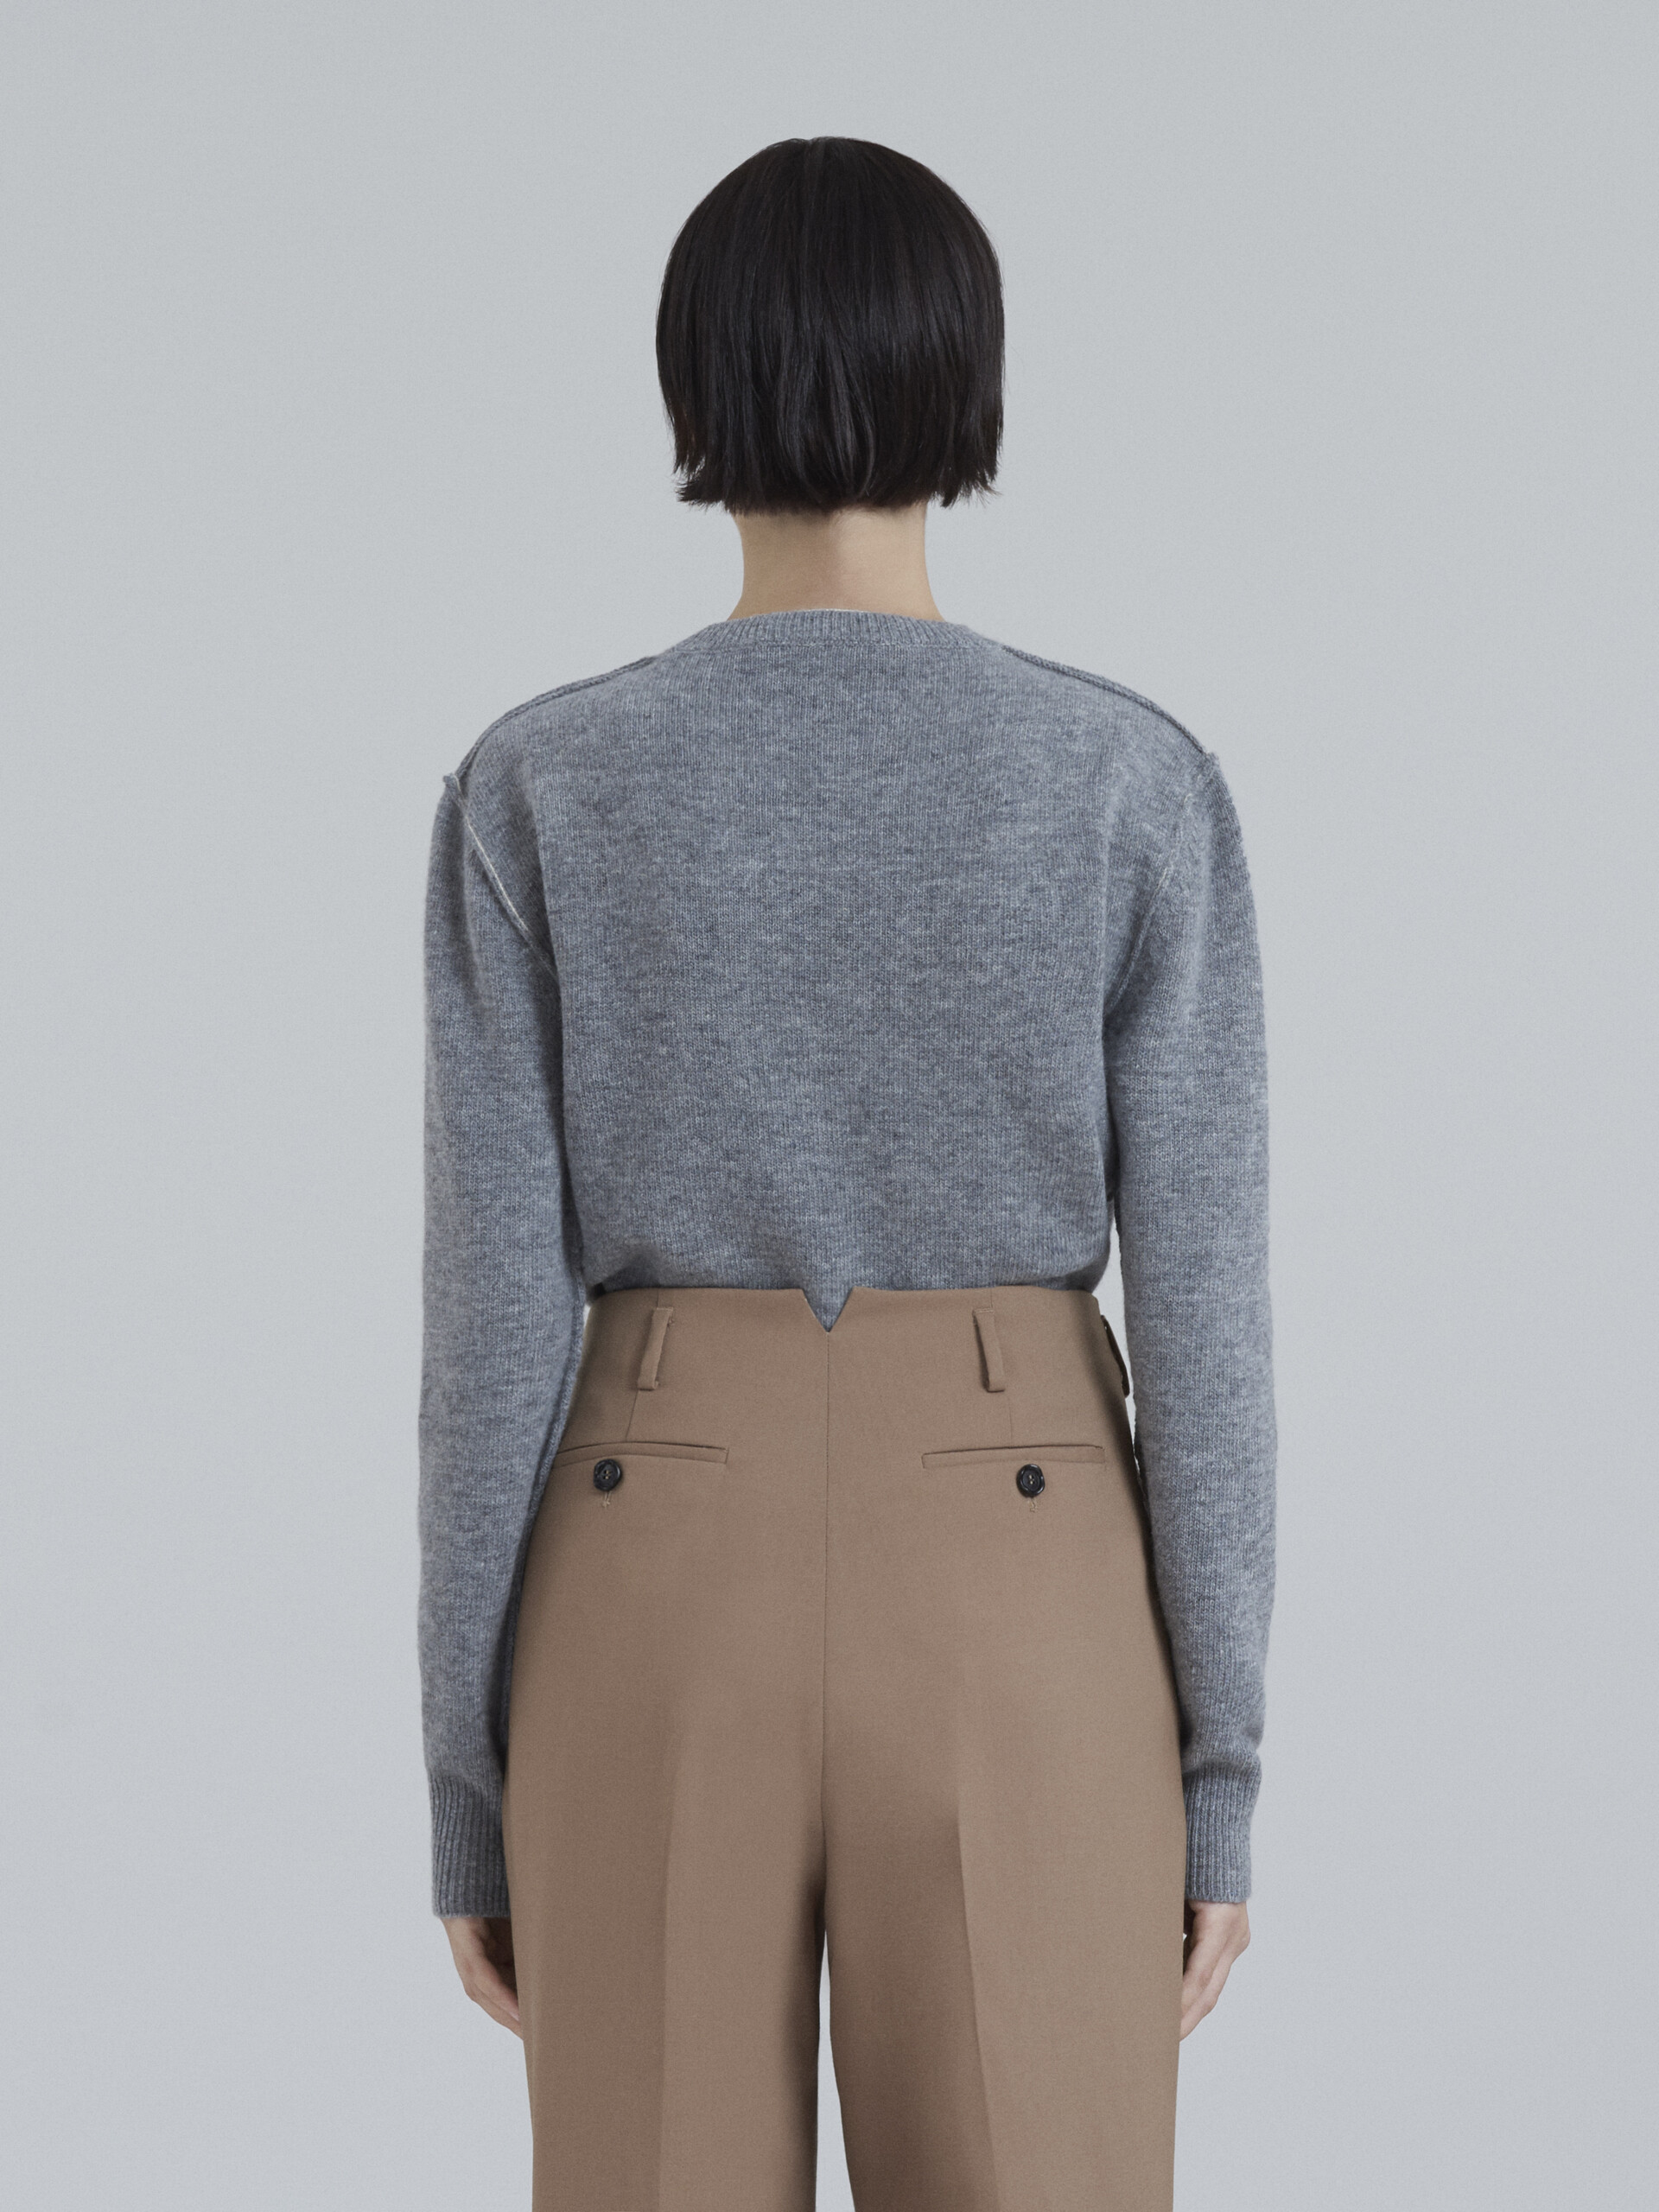 Grey Shetland wool long-sleeved sweater with embroidered Marni logo - Pullovers - Image 3